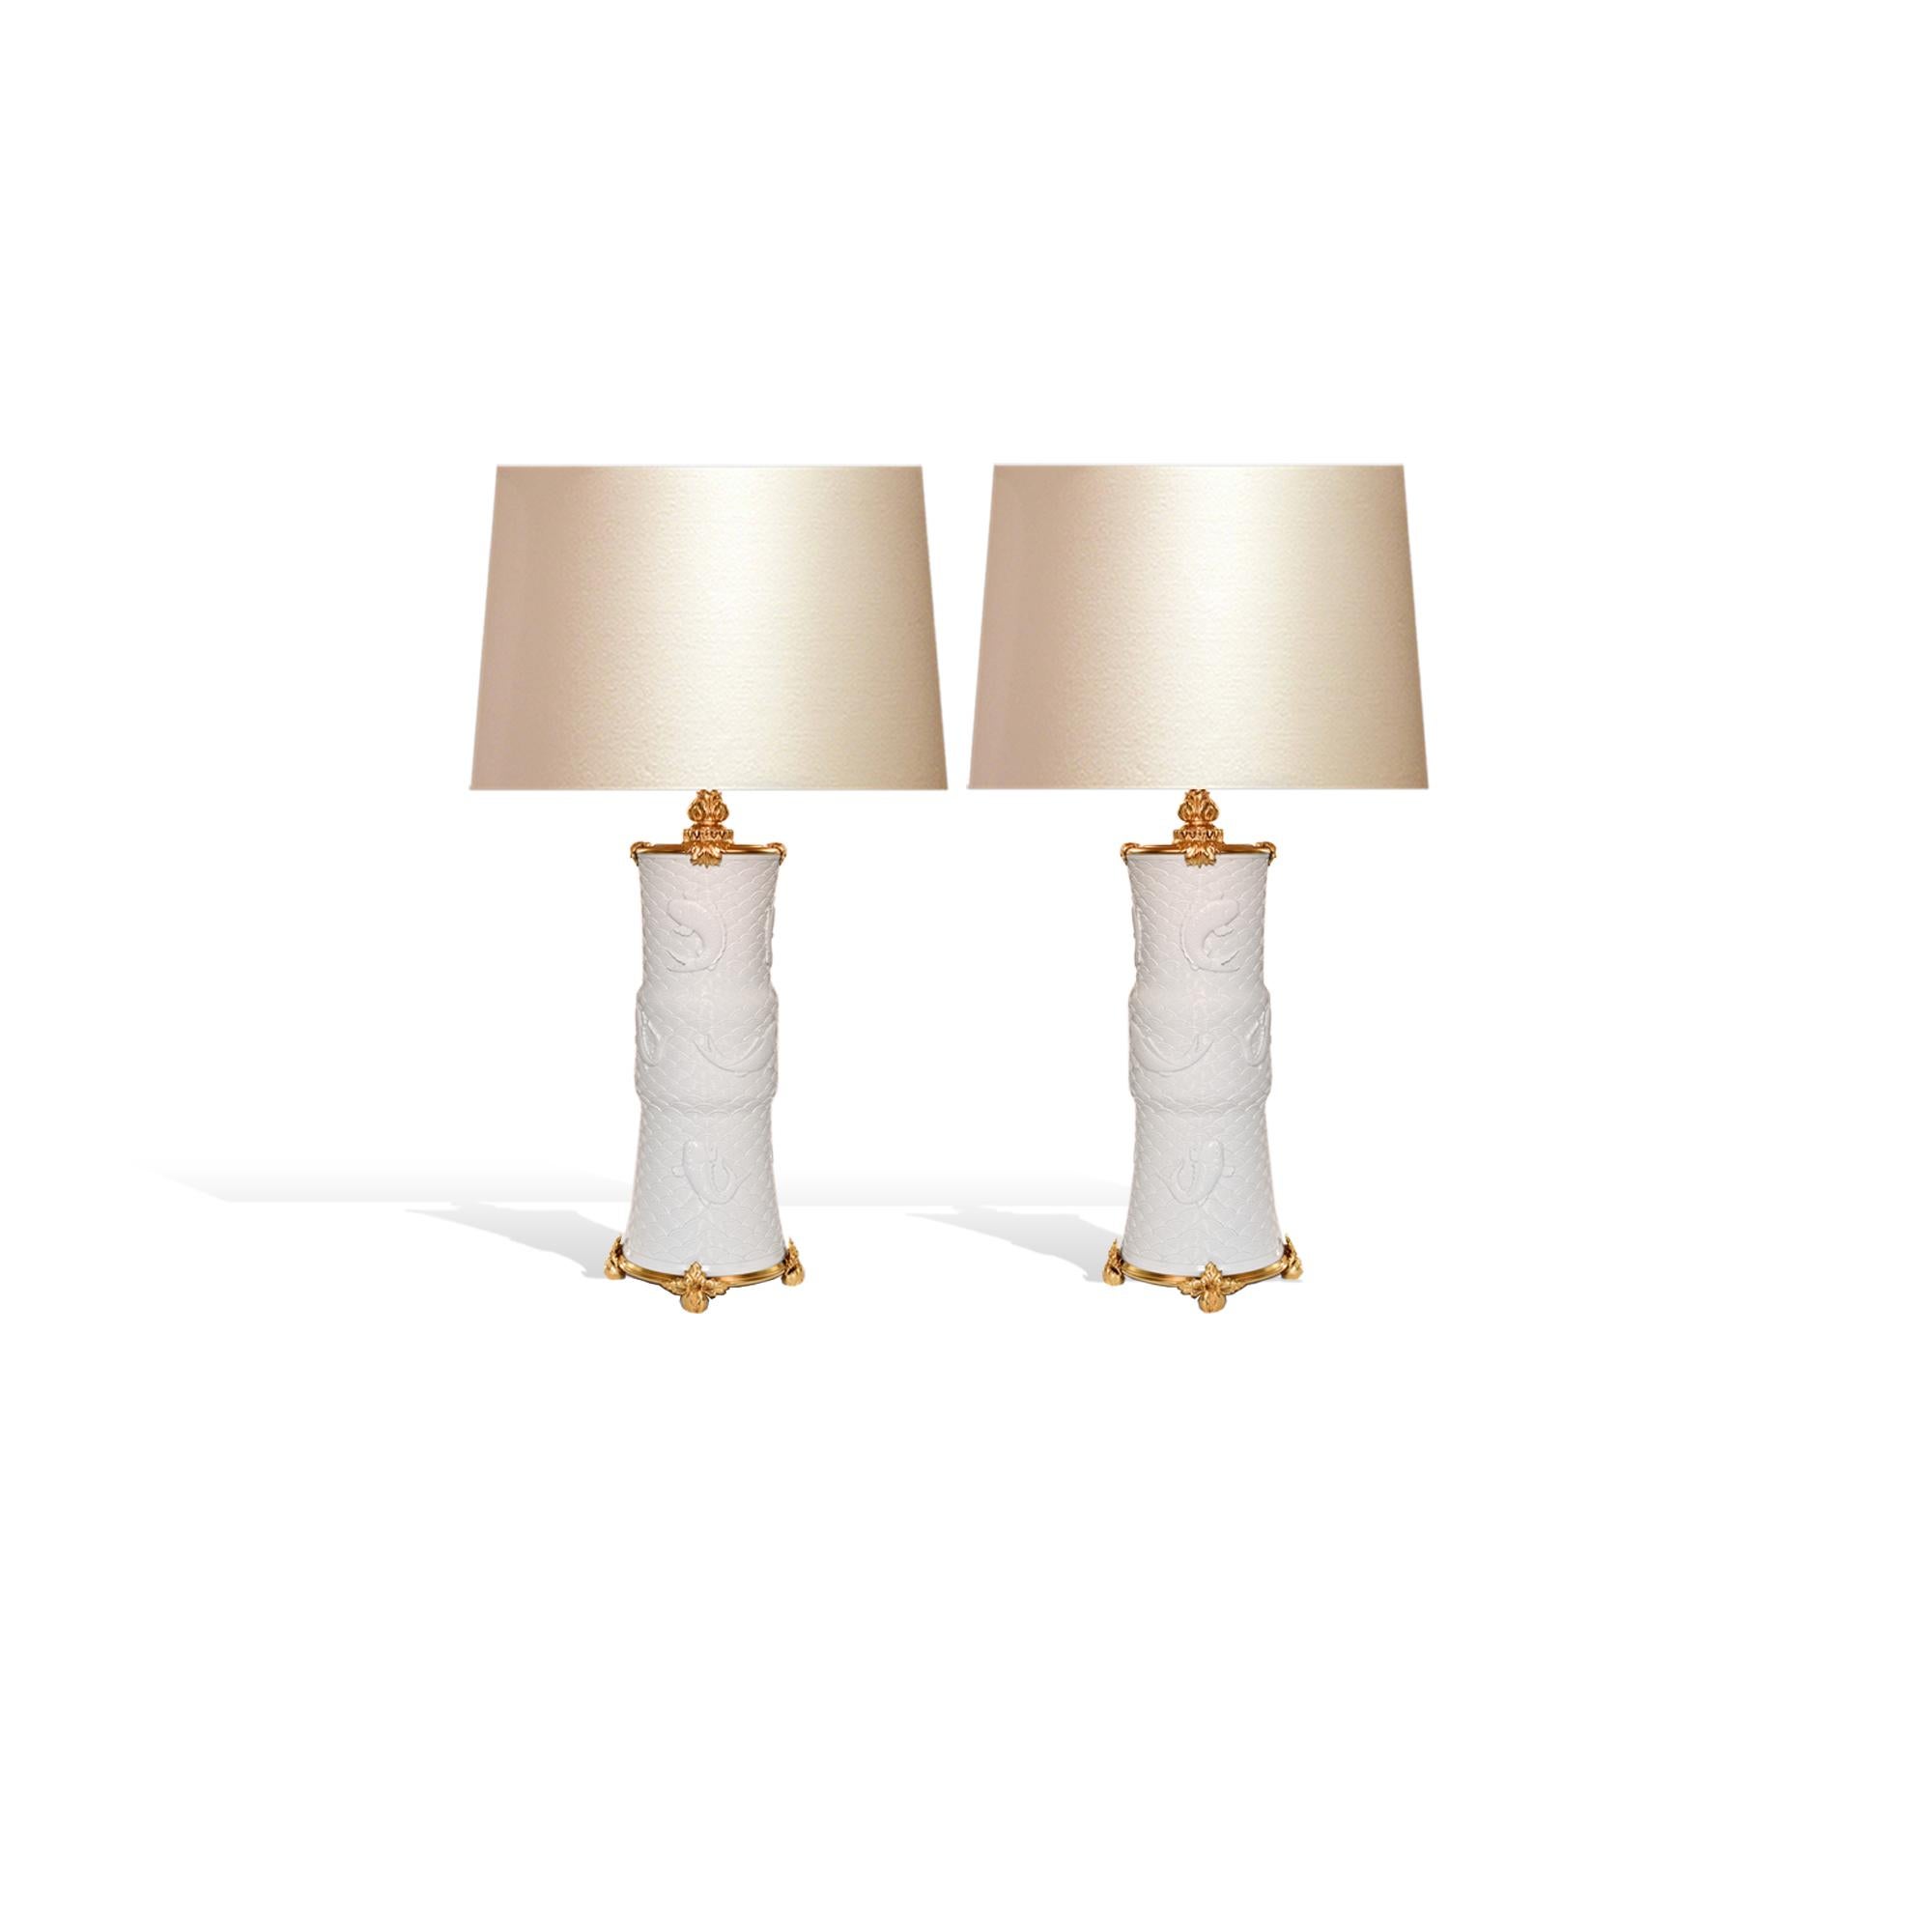 Ormolu-Mounted Porcelain Lamps In Excellent Condition For Sale In New York, NY